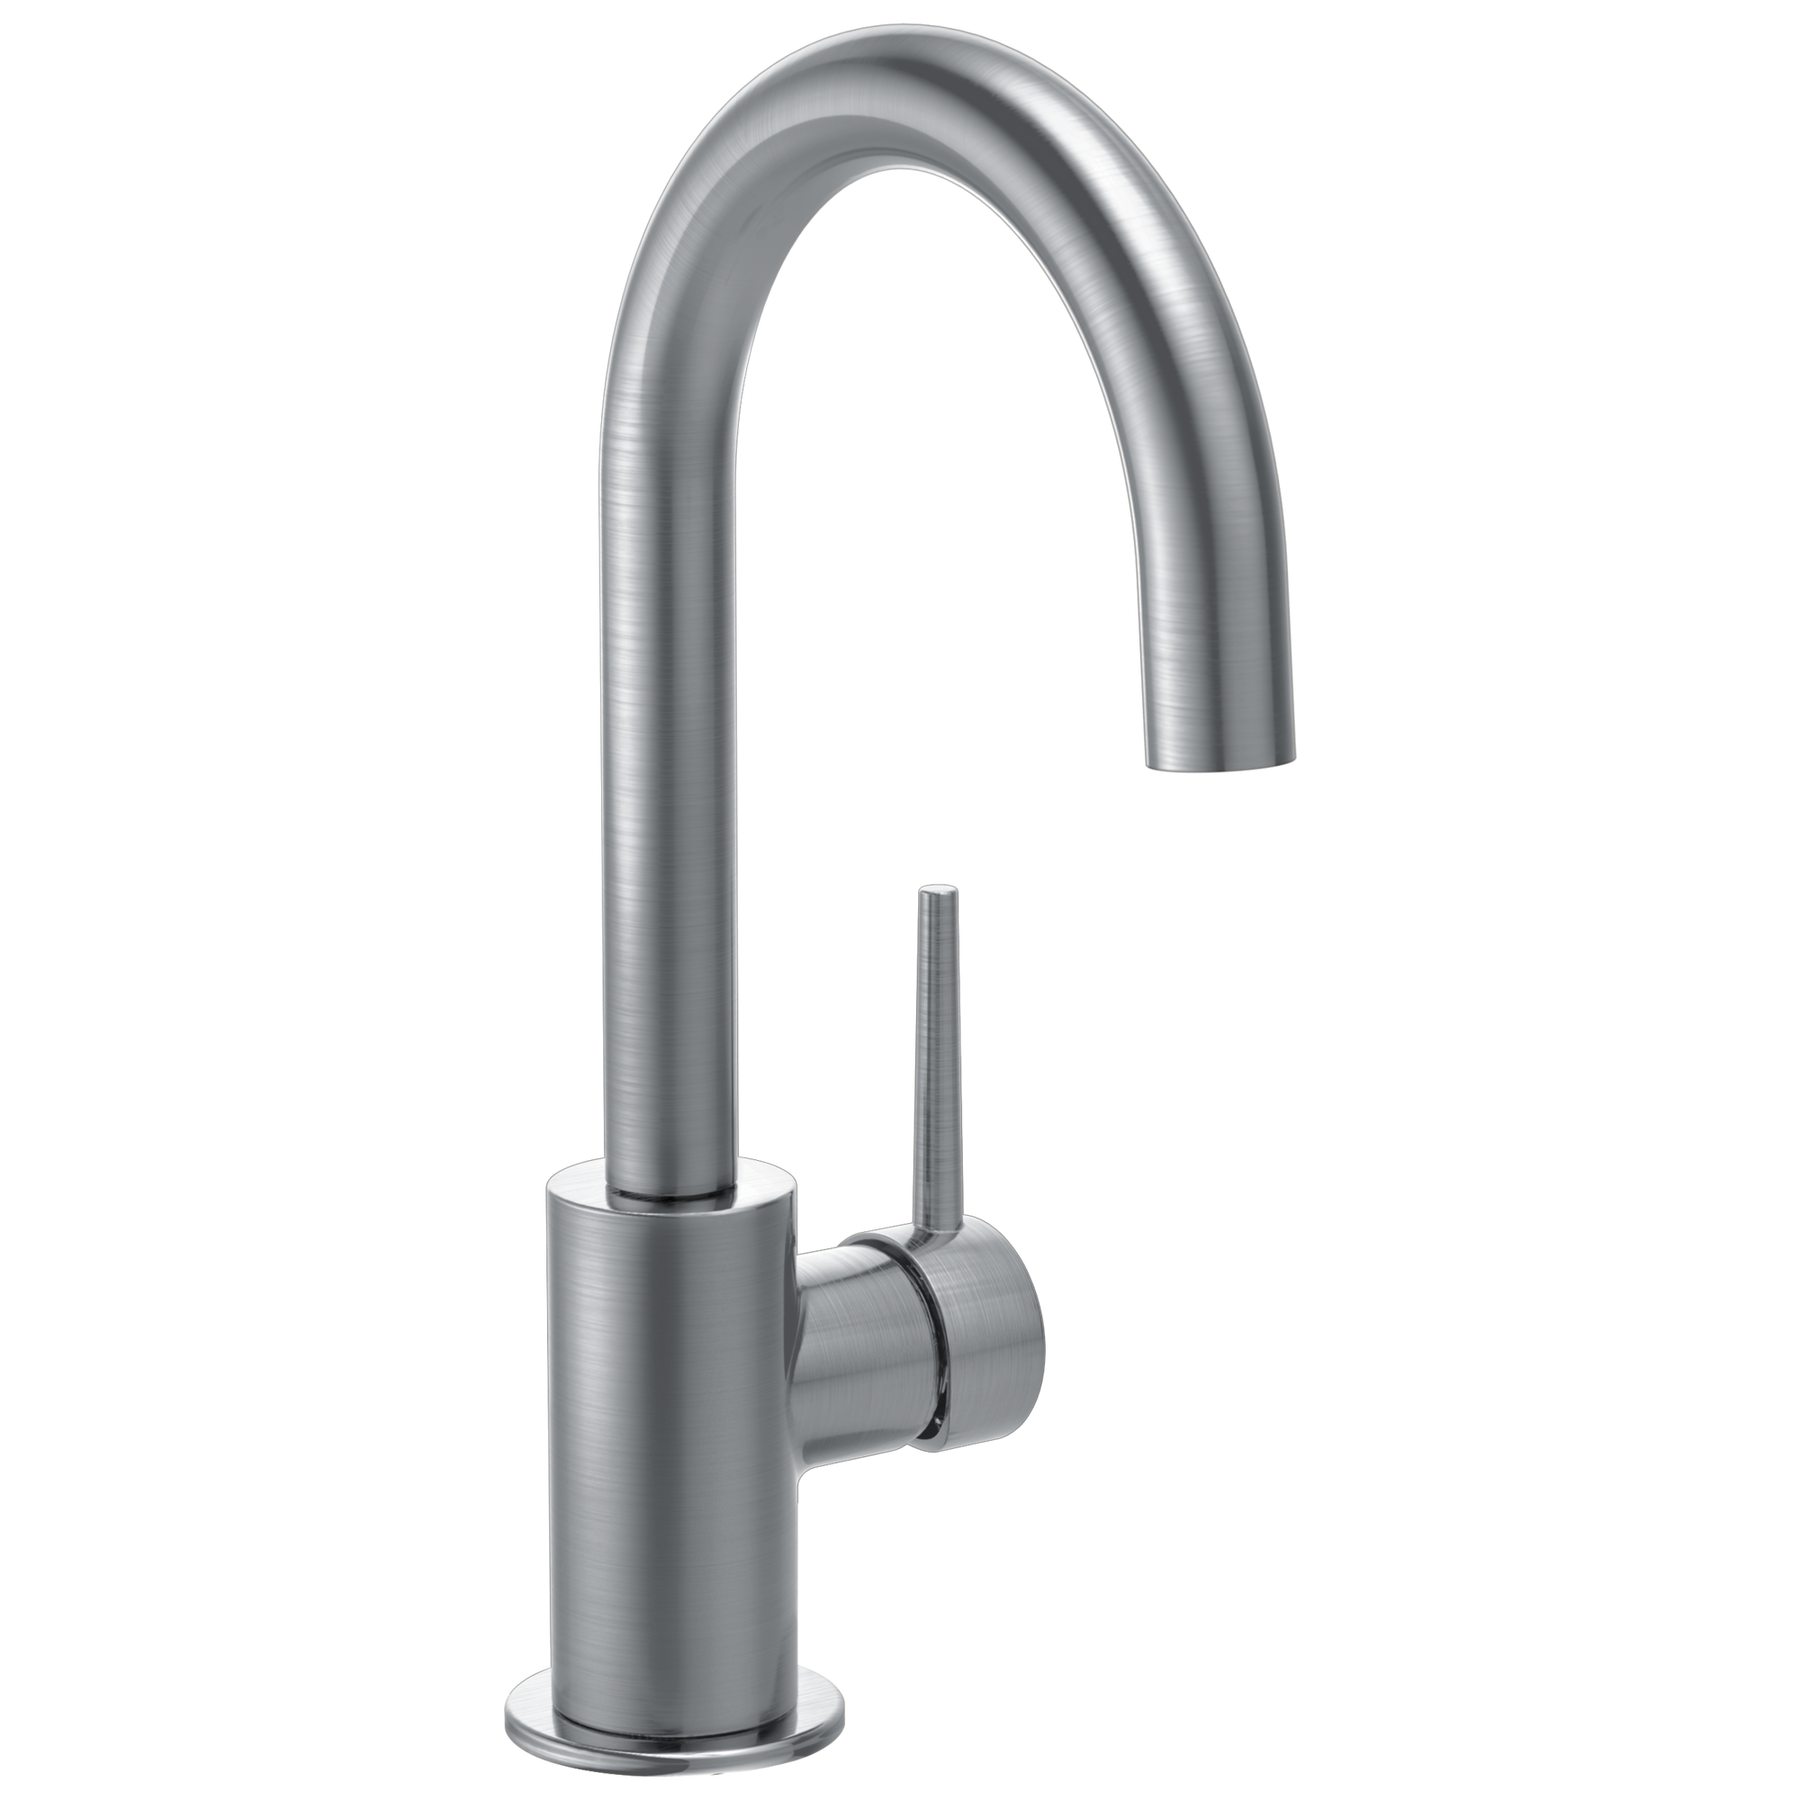 Low-pressure mixer tap: the partner for water heaters